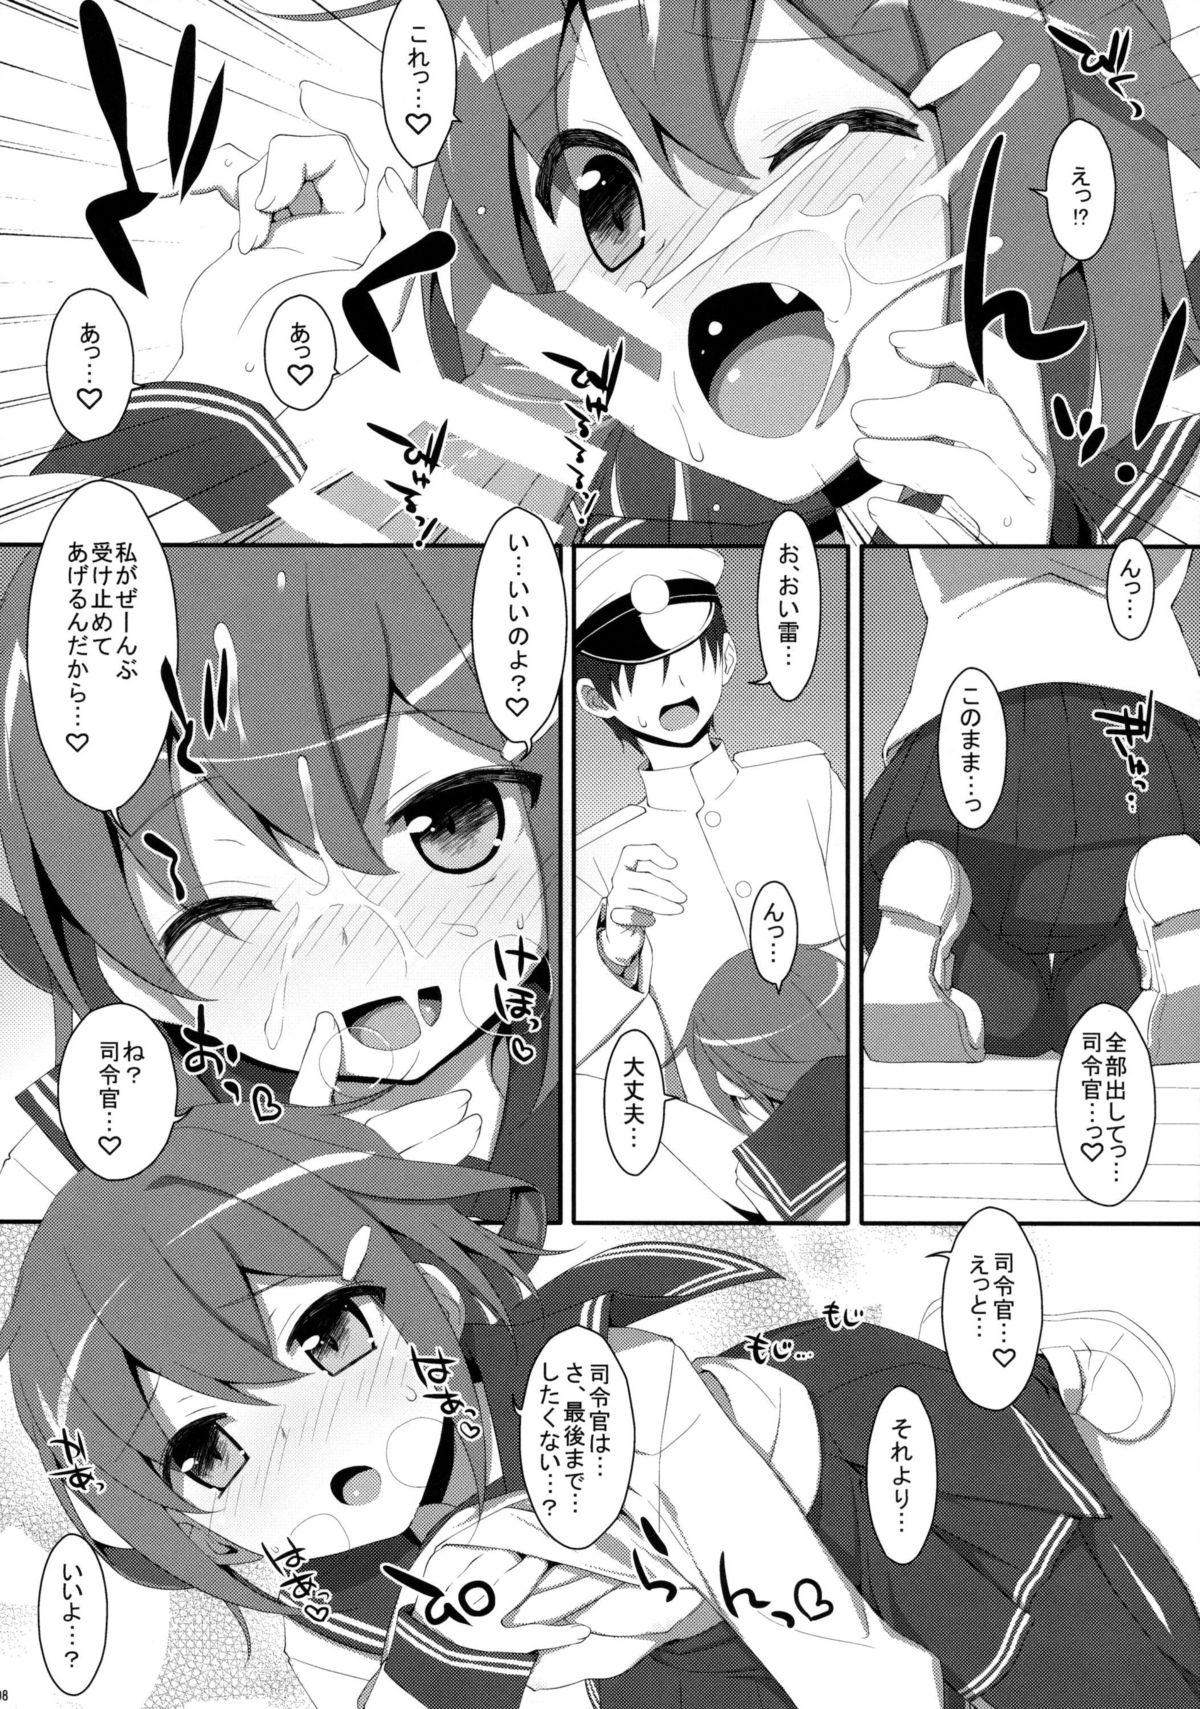 Viet Nam ダメ提督製造レシピ - Kantai collection Cheat - Page 8